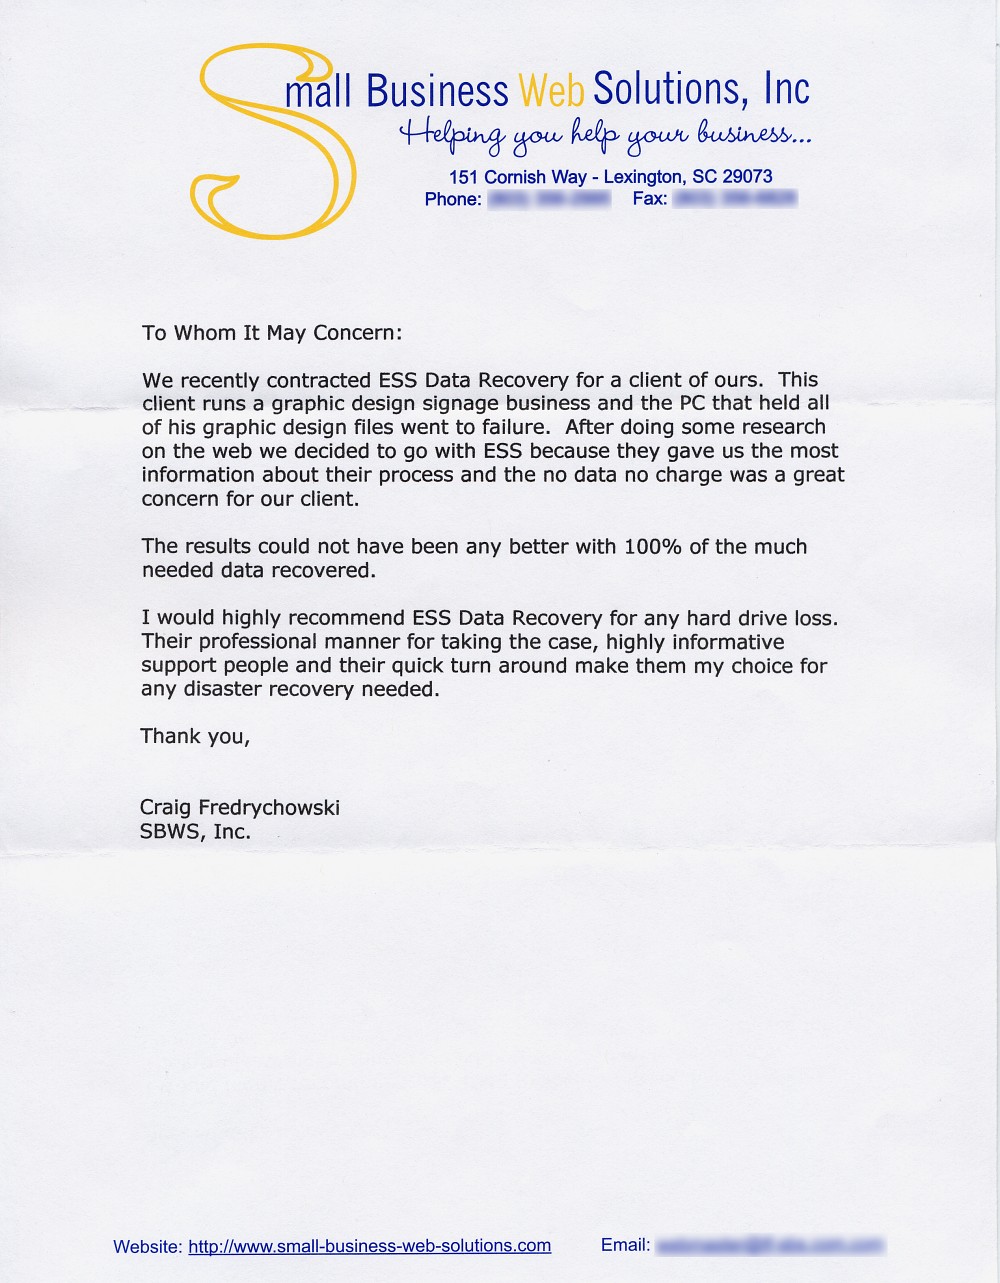 Small Business Web Solutions, Inc. testimonial letter